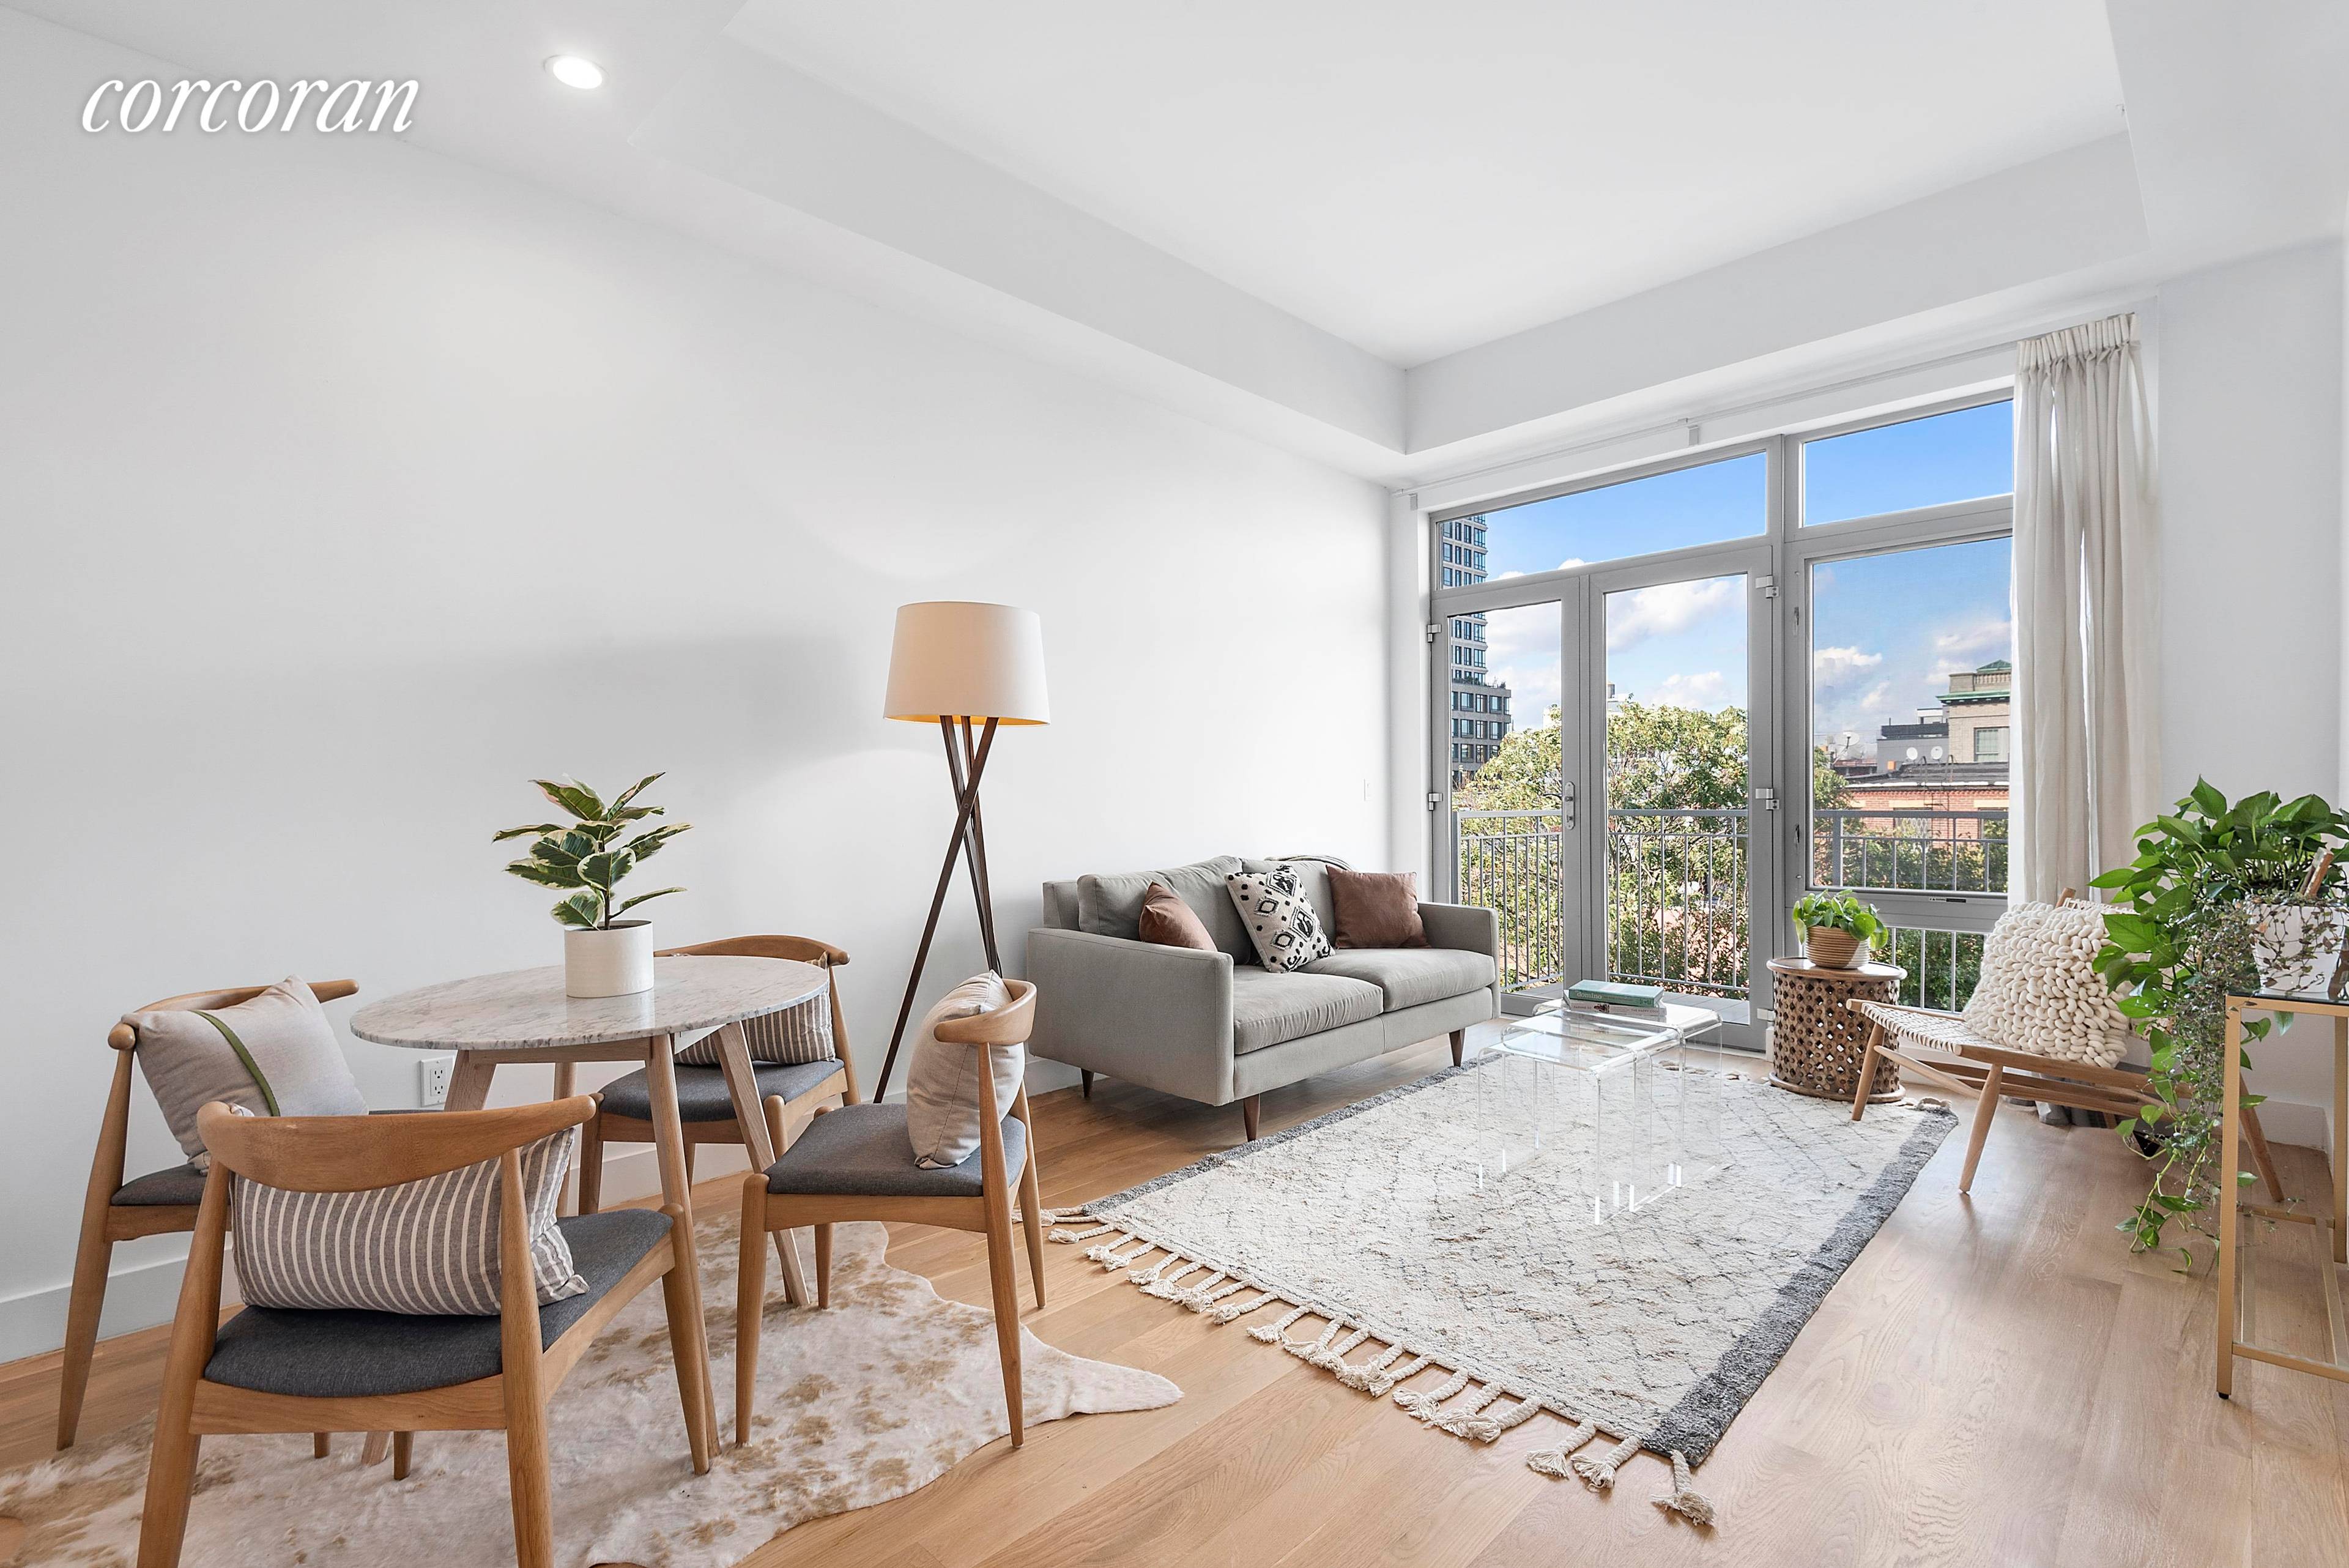 Welcome to 659 Bergen Street 3C, a sunny one bedroom one bathroom home with a private balcony in a boutique elevator condo building in prime Prospect Heights !